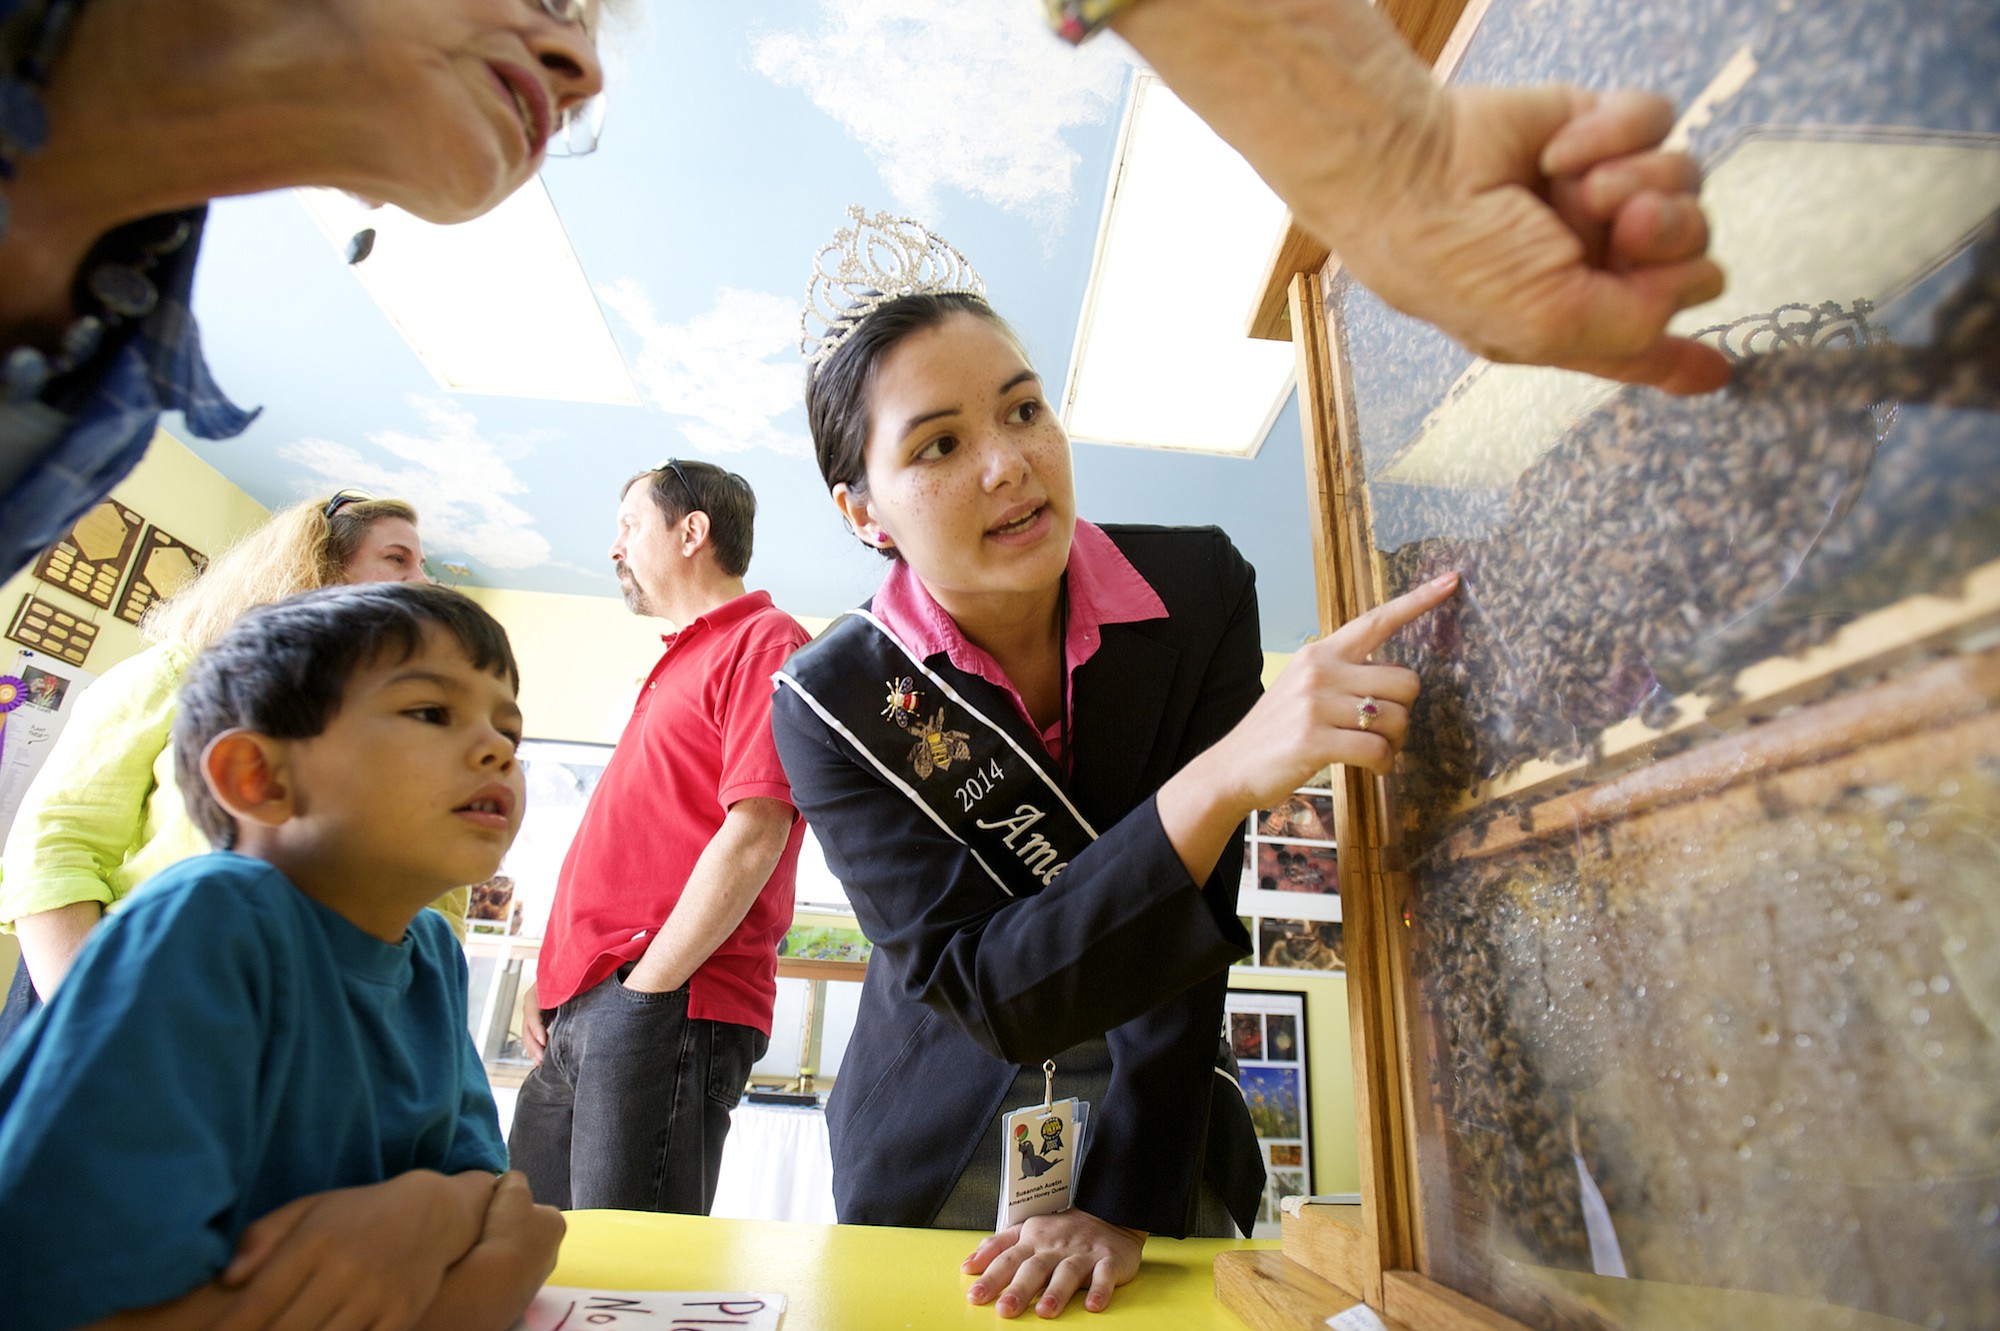 Photos by Steven Lane/The Columbian
American Honey Queen Susannah Austin talks about honey bees with Nivaran Sarki, 6, and his grandmother Kareen Messerschmidt, both from Vancouver, at the Clark County Fair Wednesday.